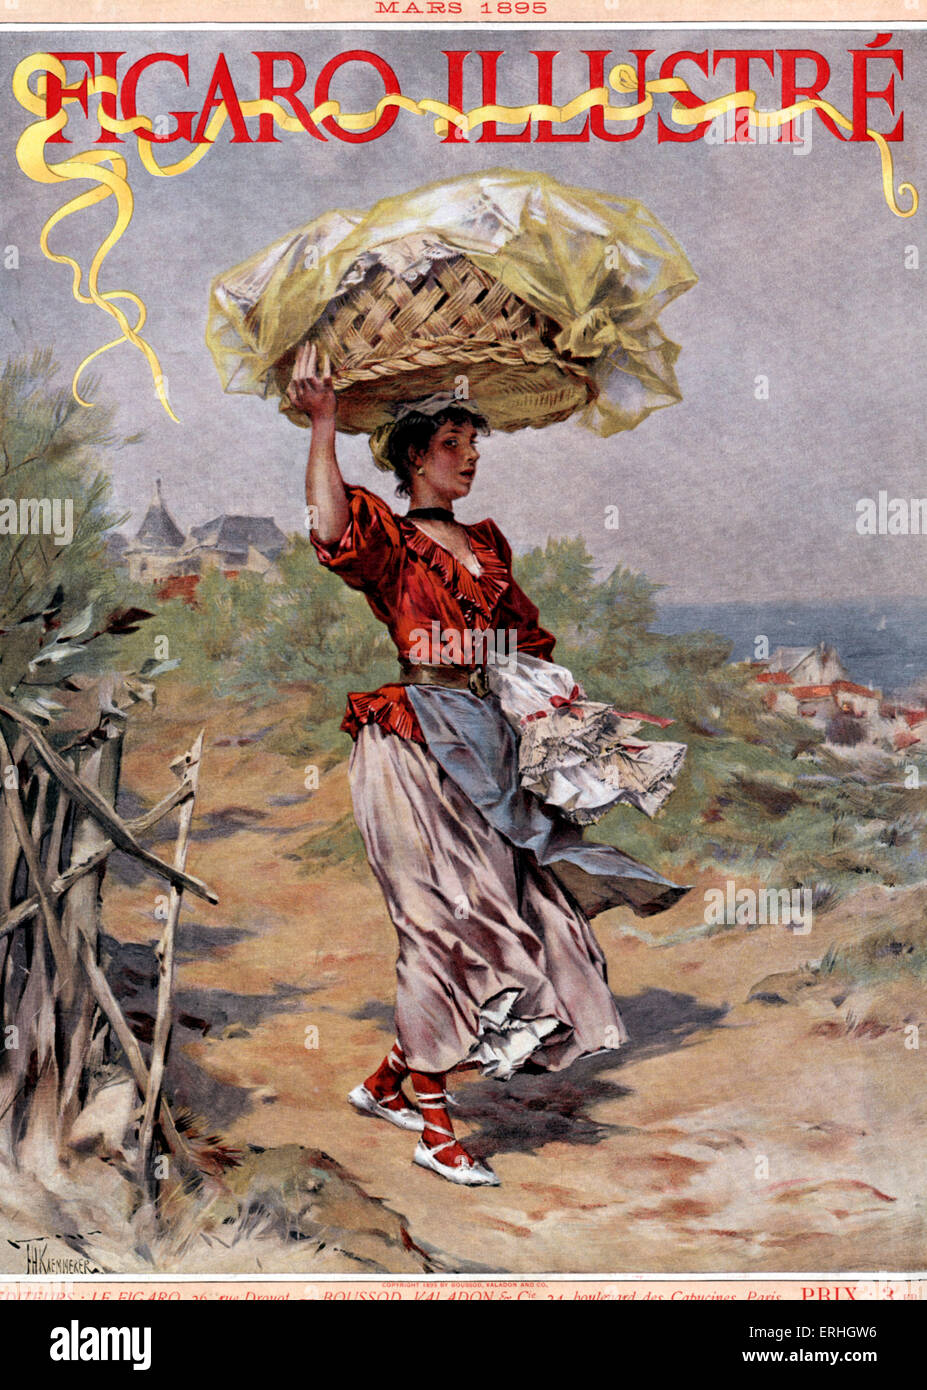 Washerwoman, 1895 - carrying a basket of washing on her head in small French village by the sea coast. From Figaro Illustré Stock Photo